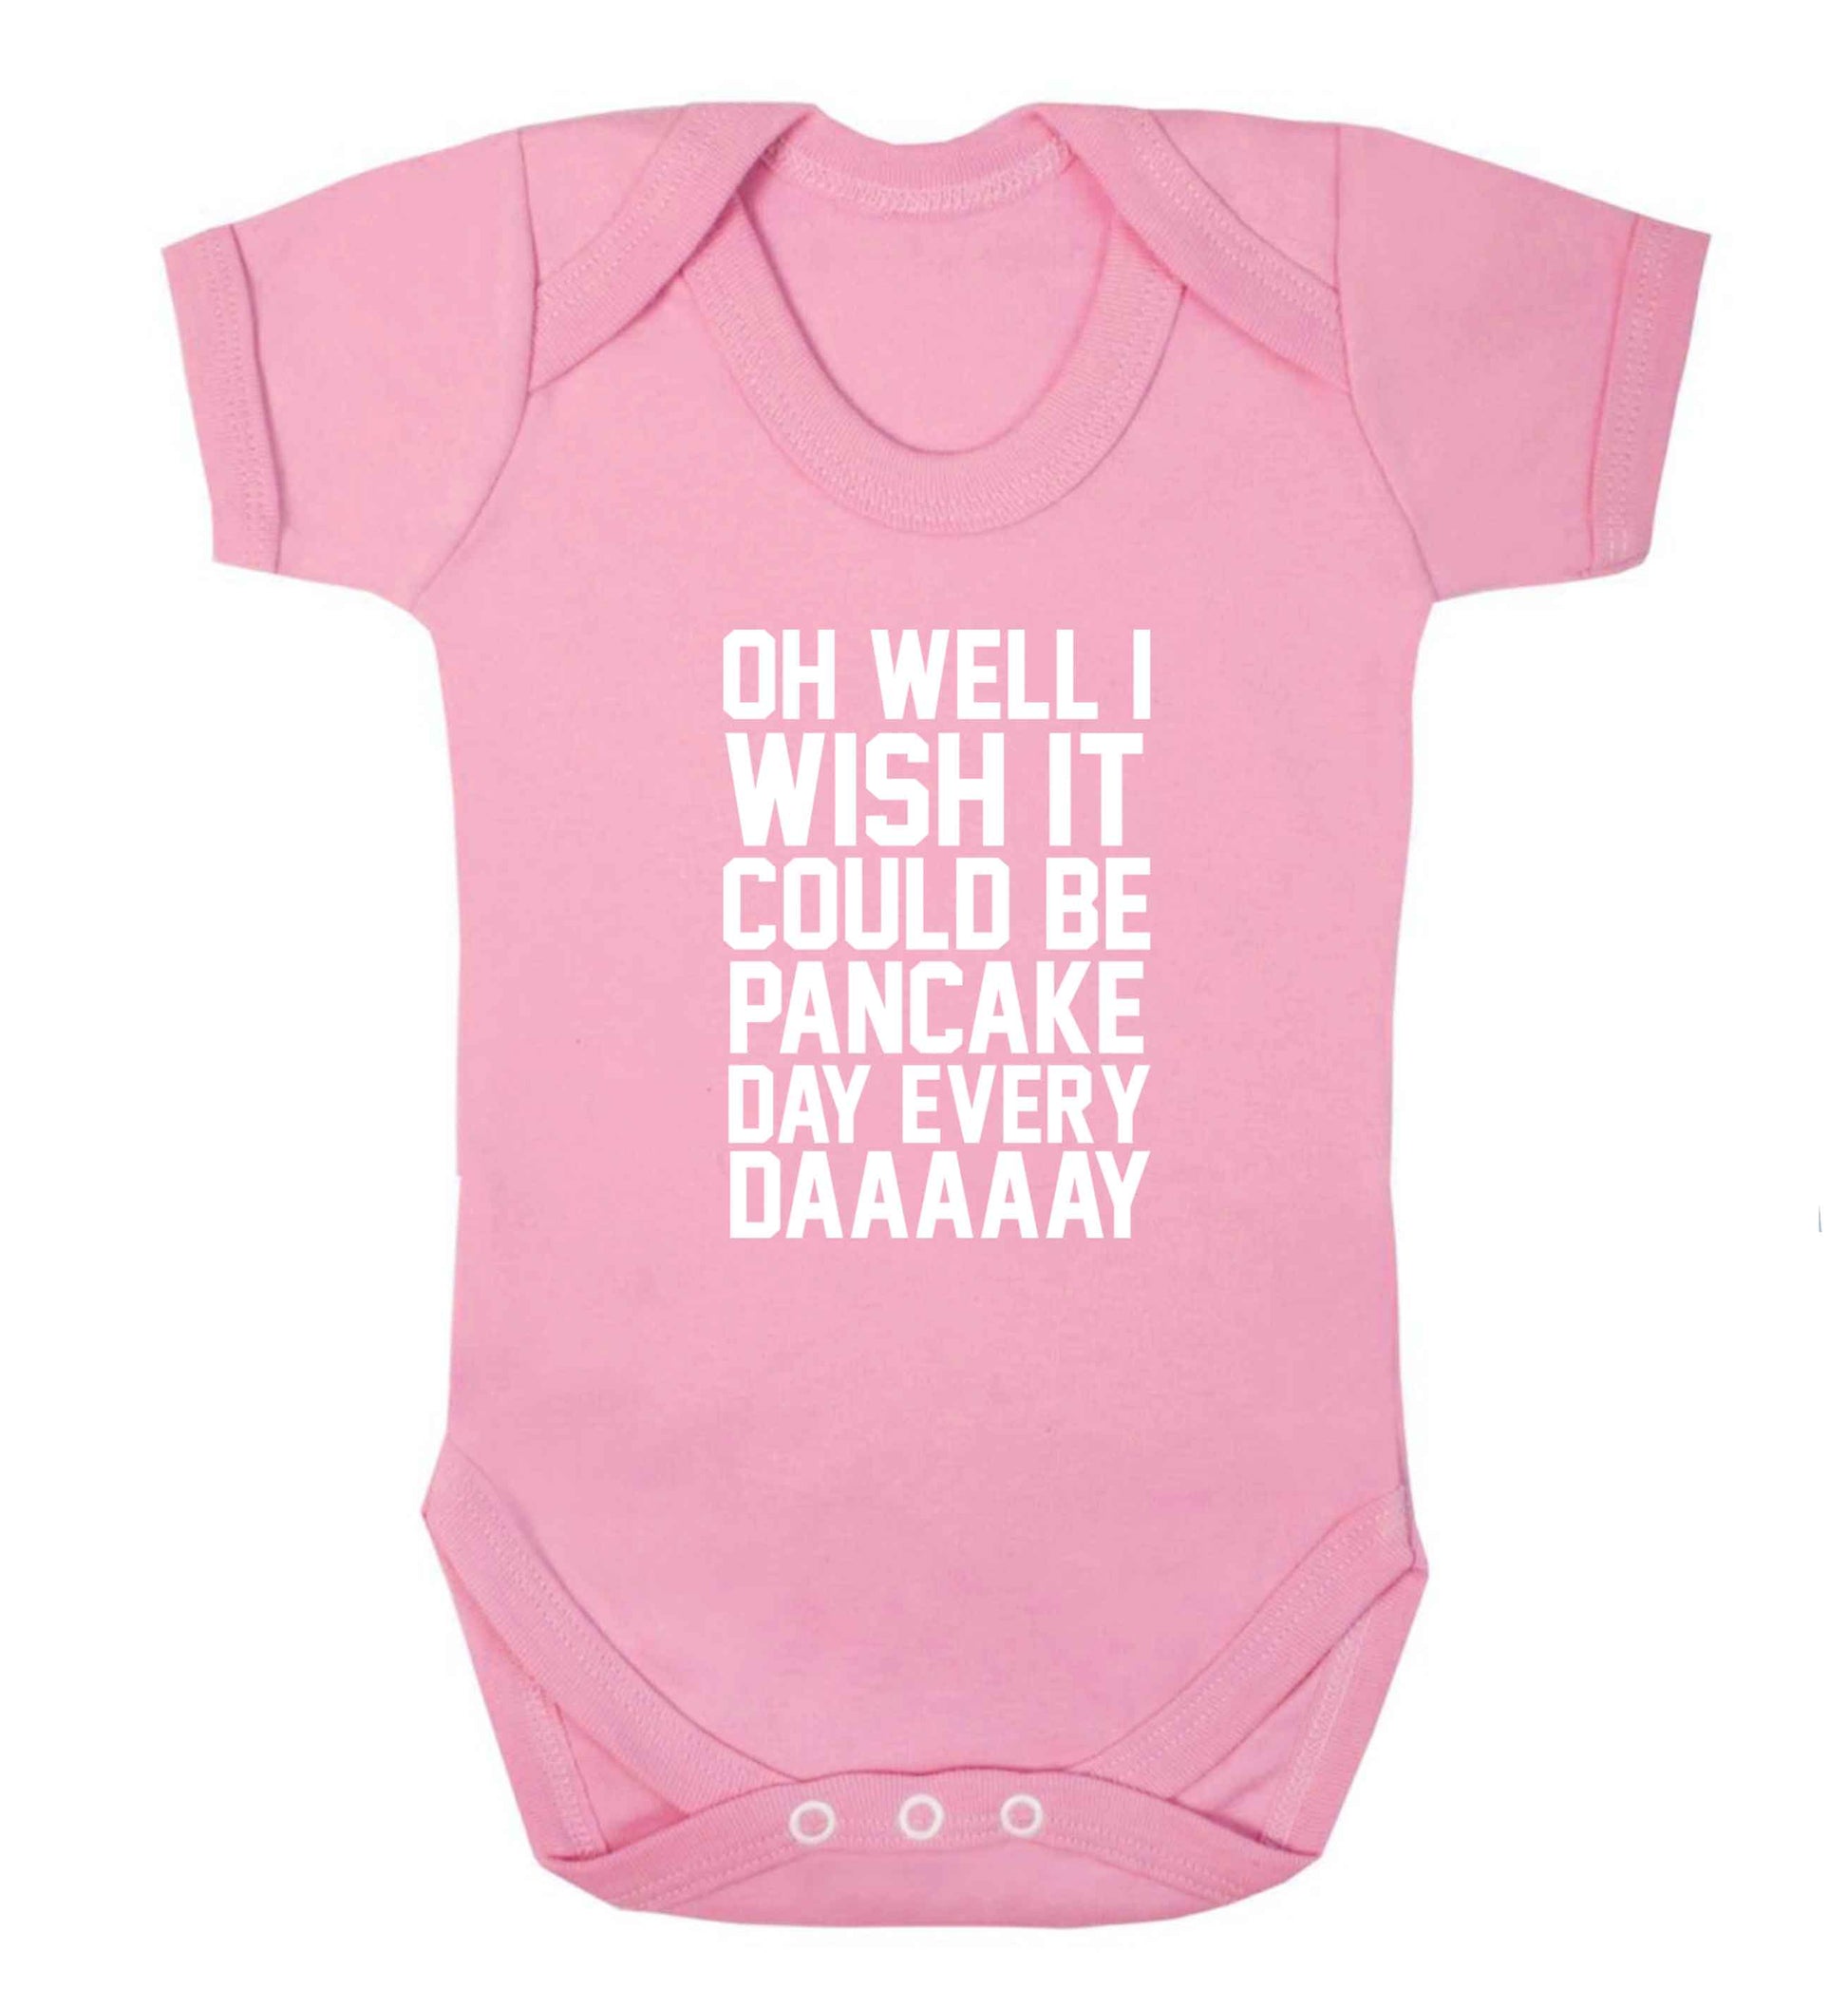 Oh well I wish it could be pancake day every day baby vest pale pink 18-24 months